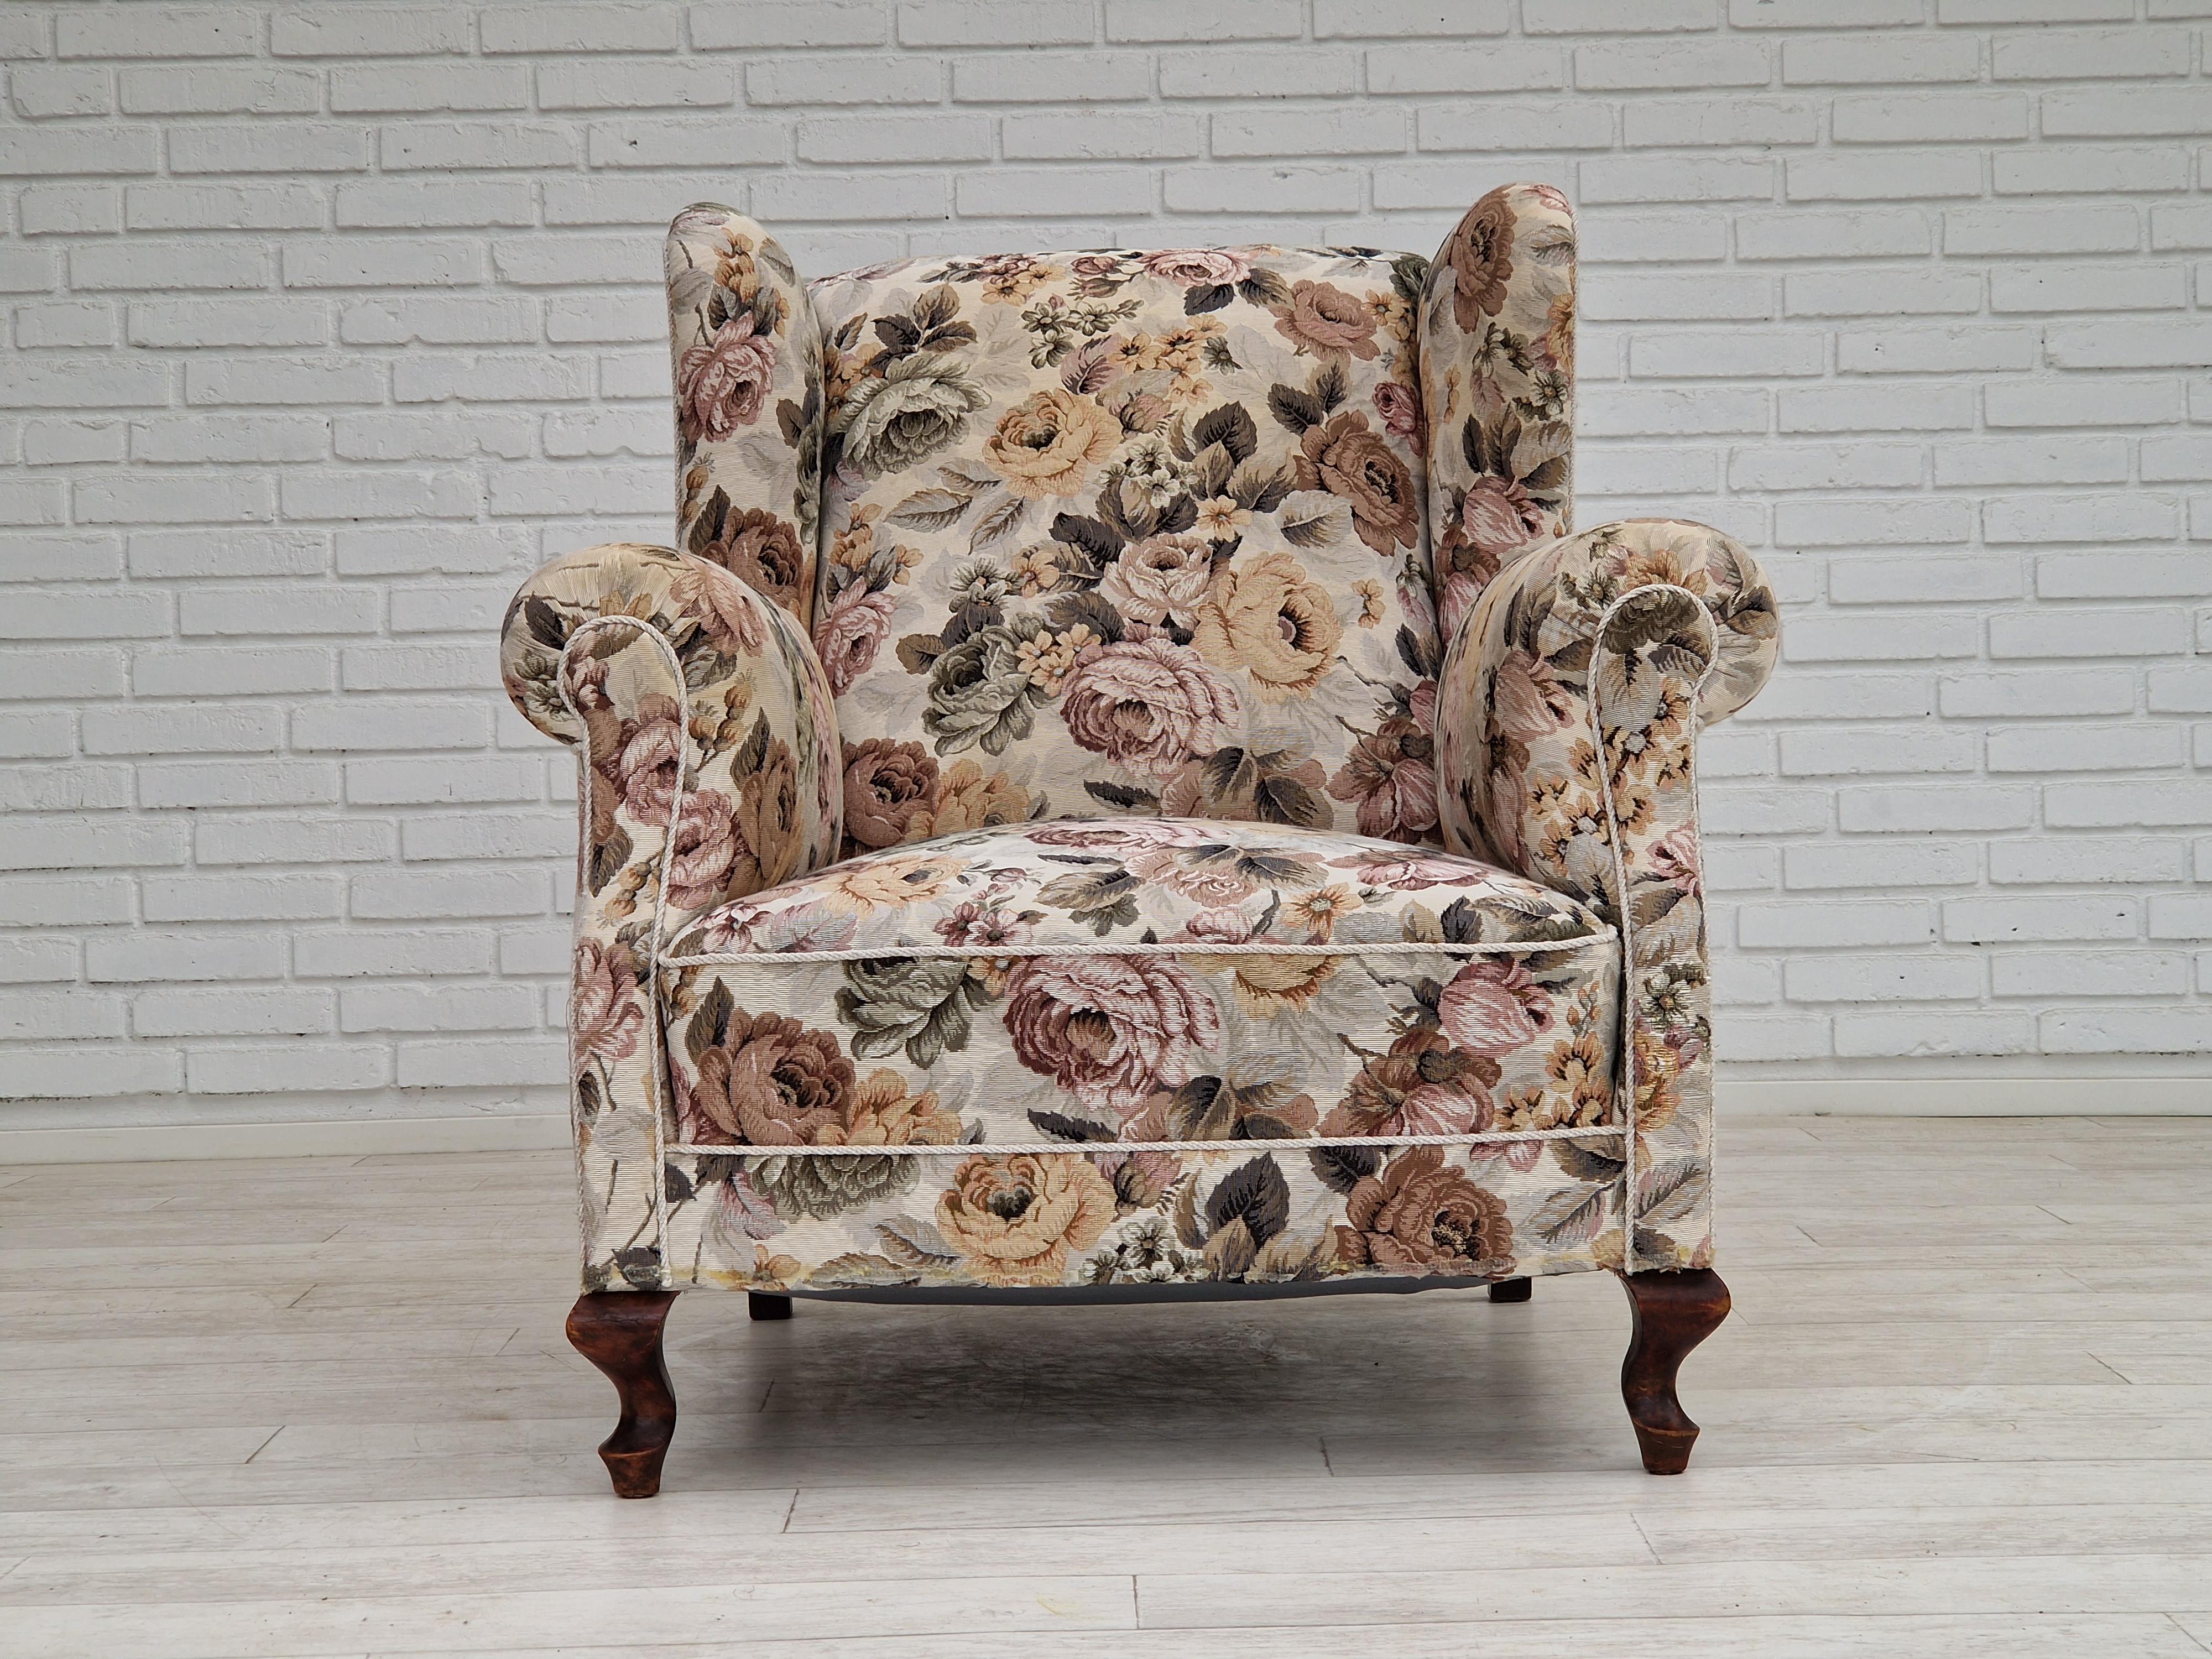 Fabric 1950s, Danish vintage relax chair in 